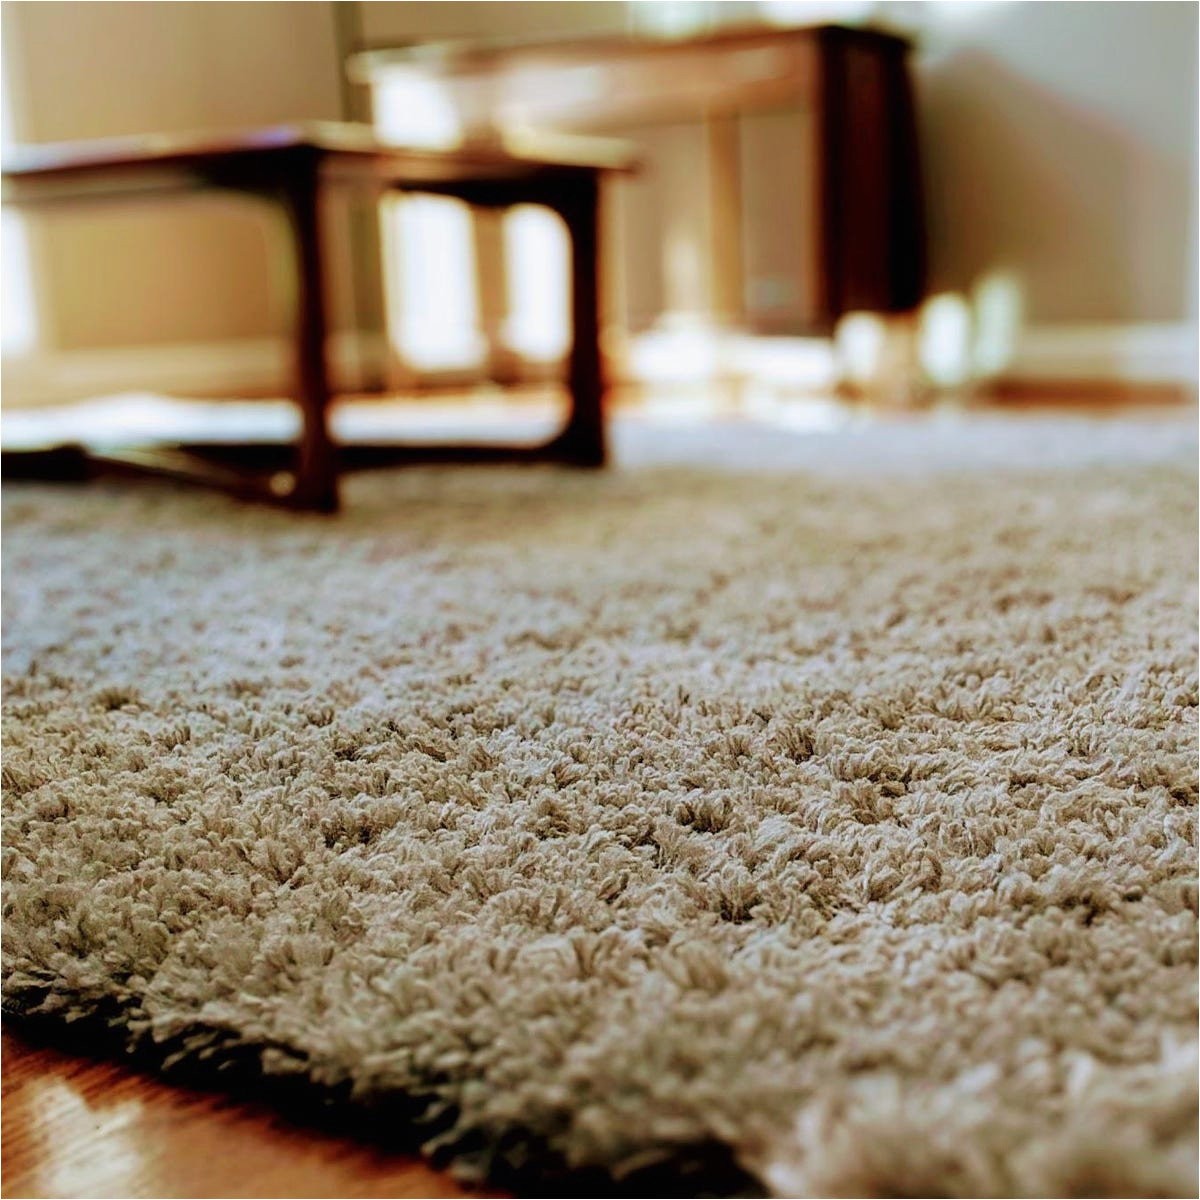 Quality area Rugs Near Me What You Need to Know before Buying A Rug Online – Cnet